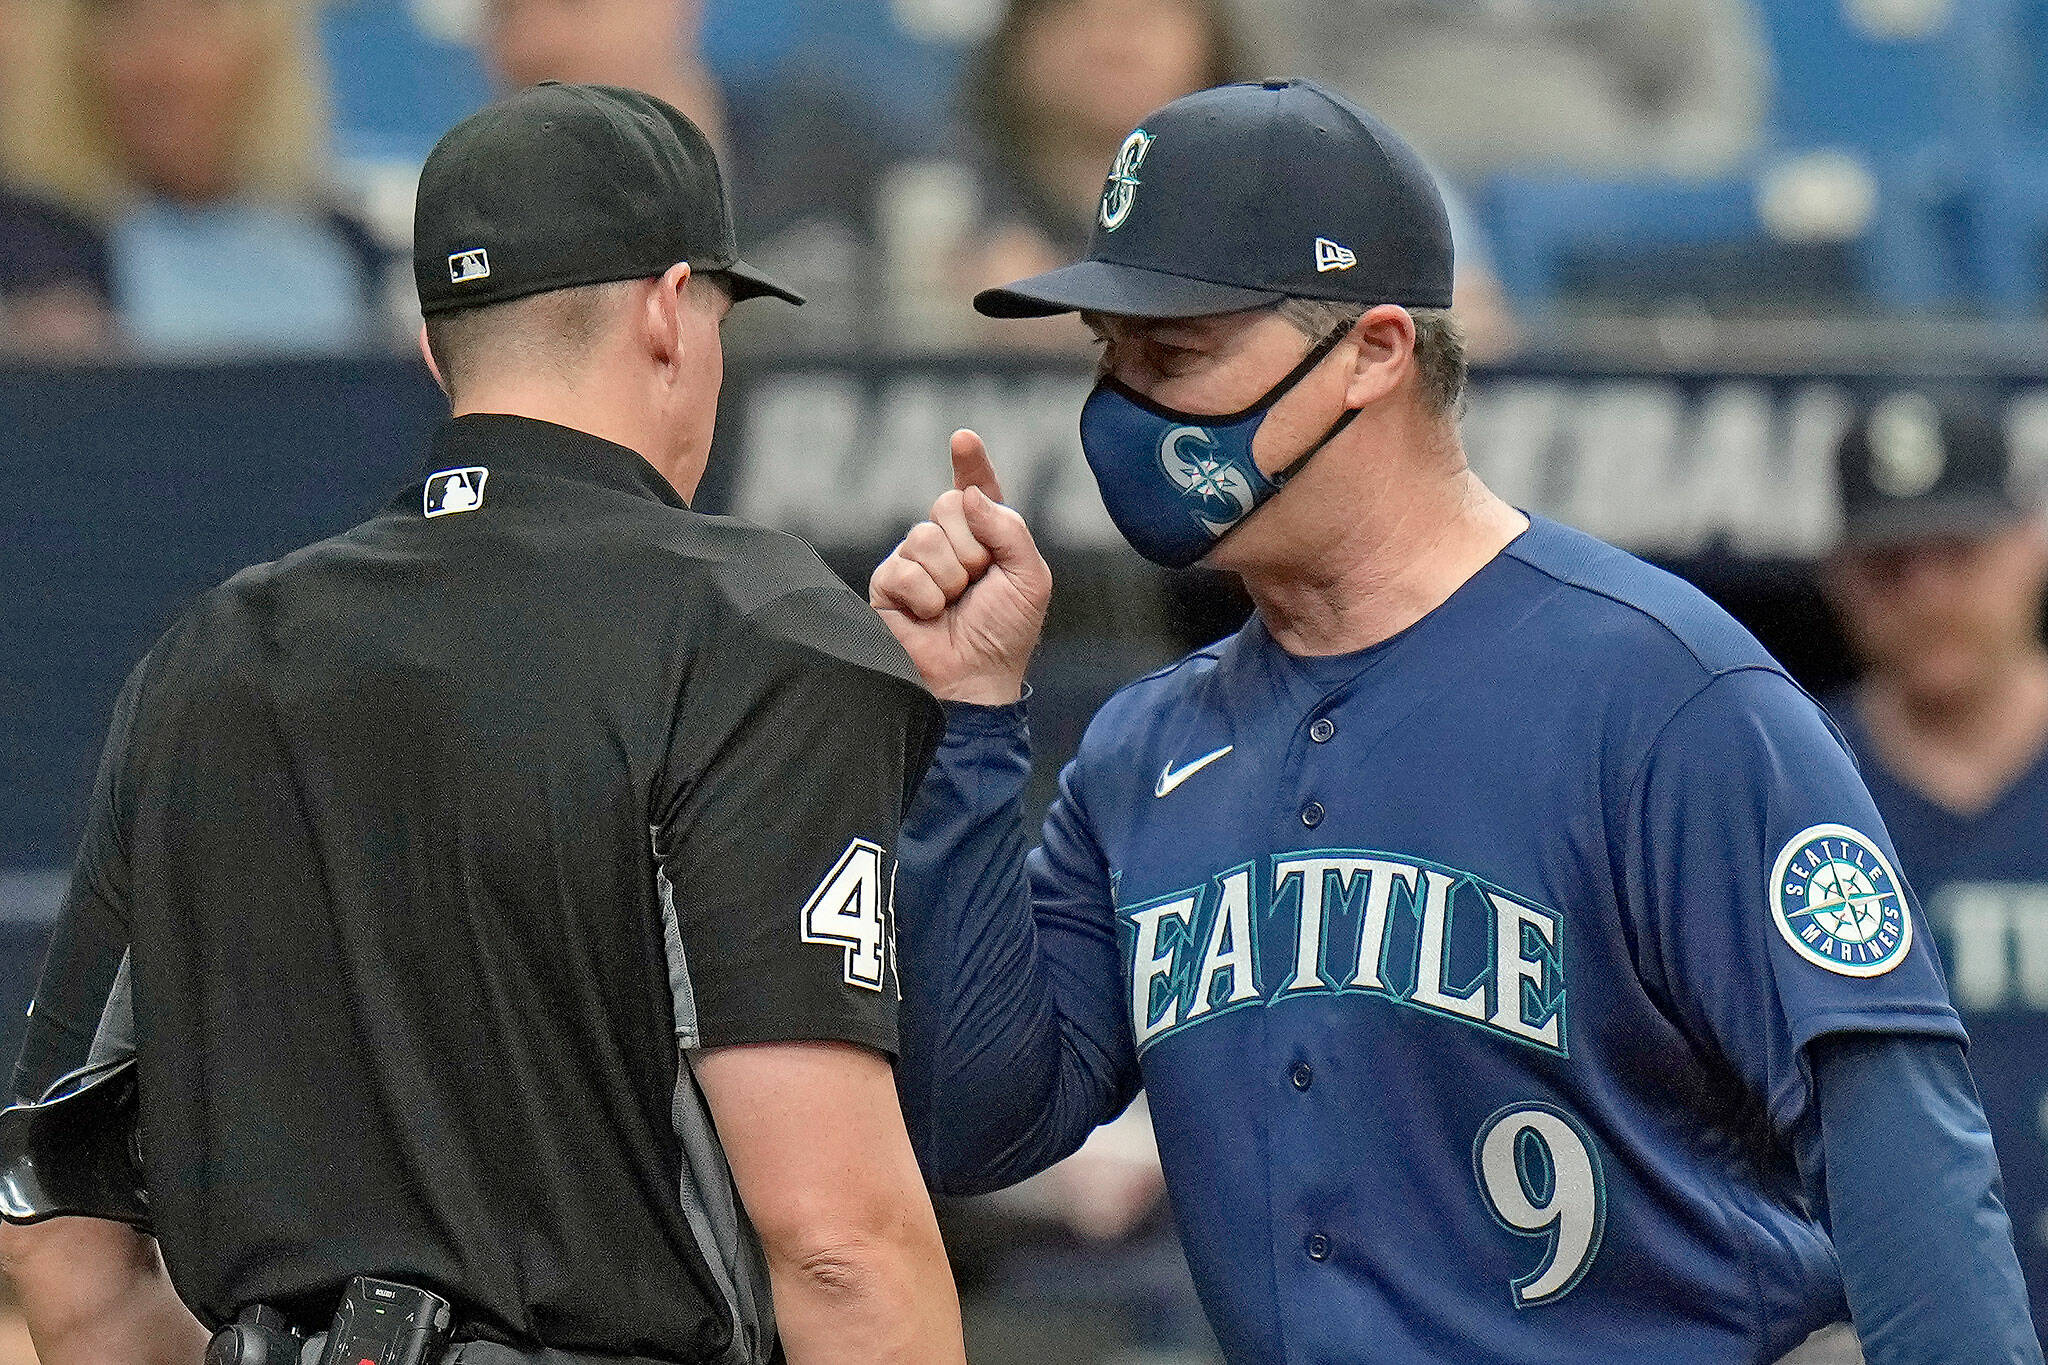 Mariners manager Scott Servais argues with home plate umpire Shane Livensparger after being ejected from the game during the sixth inning against the Rays on Thursday in St. Petersburg, Fla. (AP Photo/Chris O’Meara)